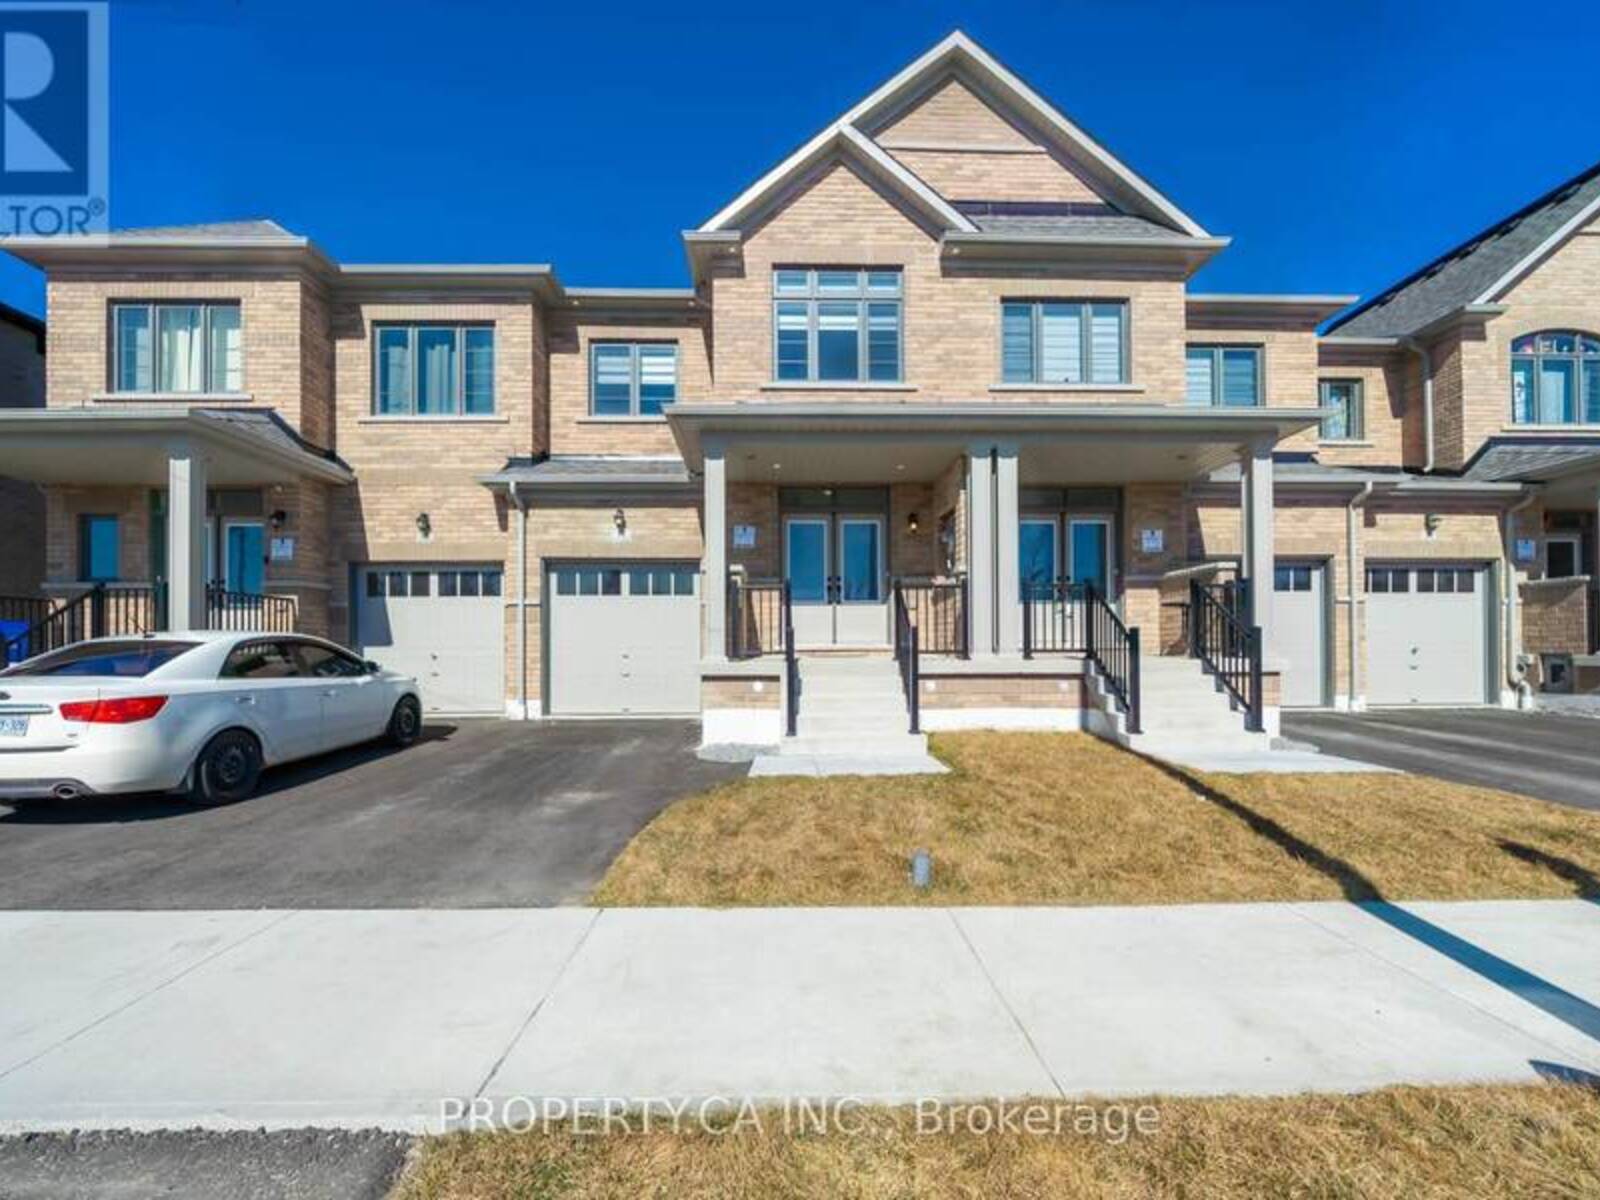 14 LITTLEWOOD DR, Whitby, Ontario L1P 0H4